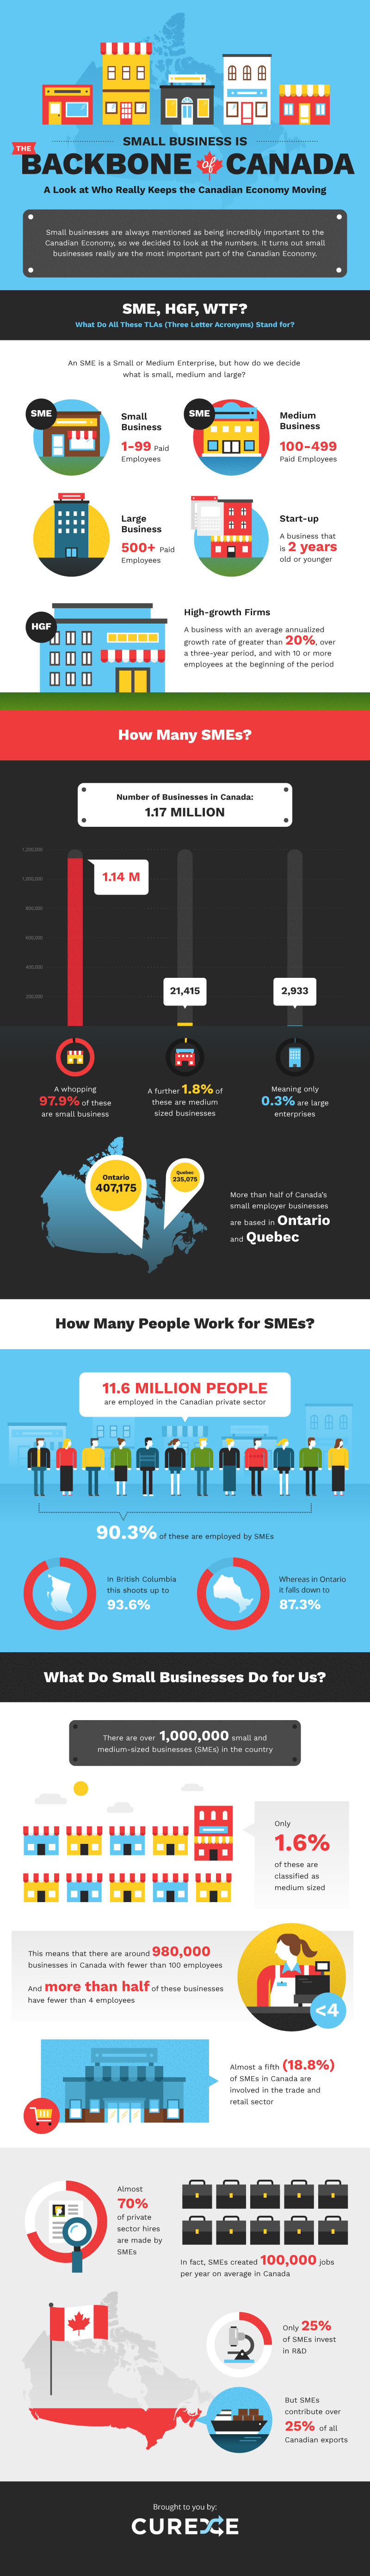 Infographic for Small Business is The Backbone of Canada